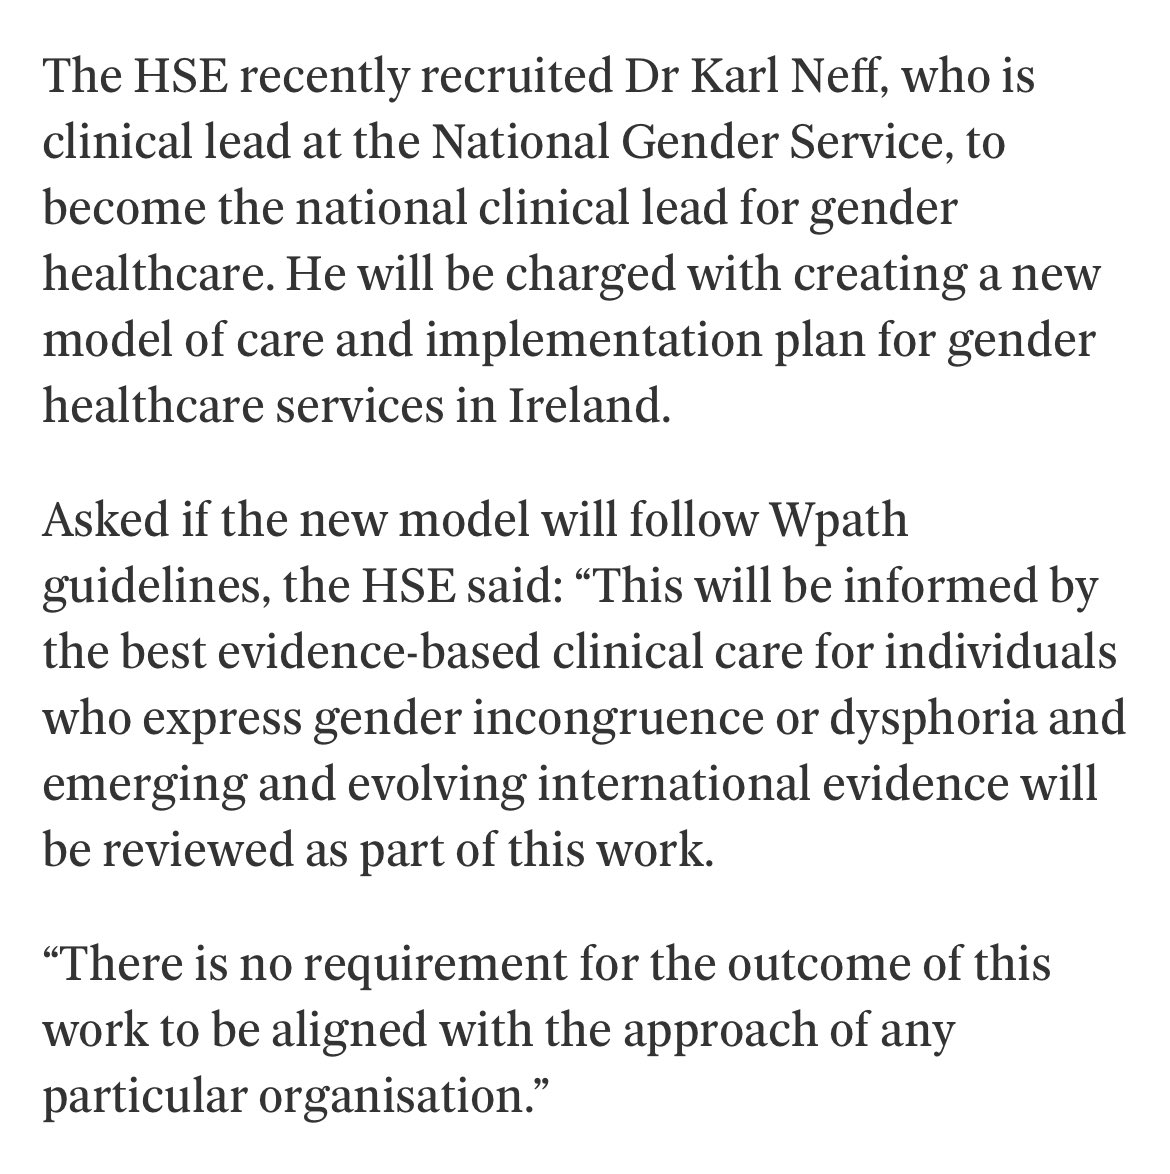 Great to see Mary o’Conor recommend  @stellaomalley3’s excellent book WhenKidsSayThey’reTrans & news @HSELive will NOT follow WPATH (per misguided ProgForGov) rather will b informed by best evidence-based clinical care @Independent_ie independent.ie/irish-news/hea…